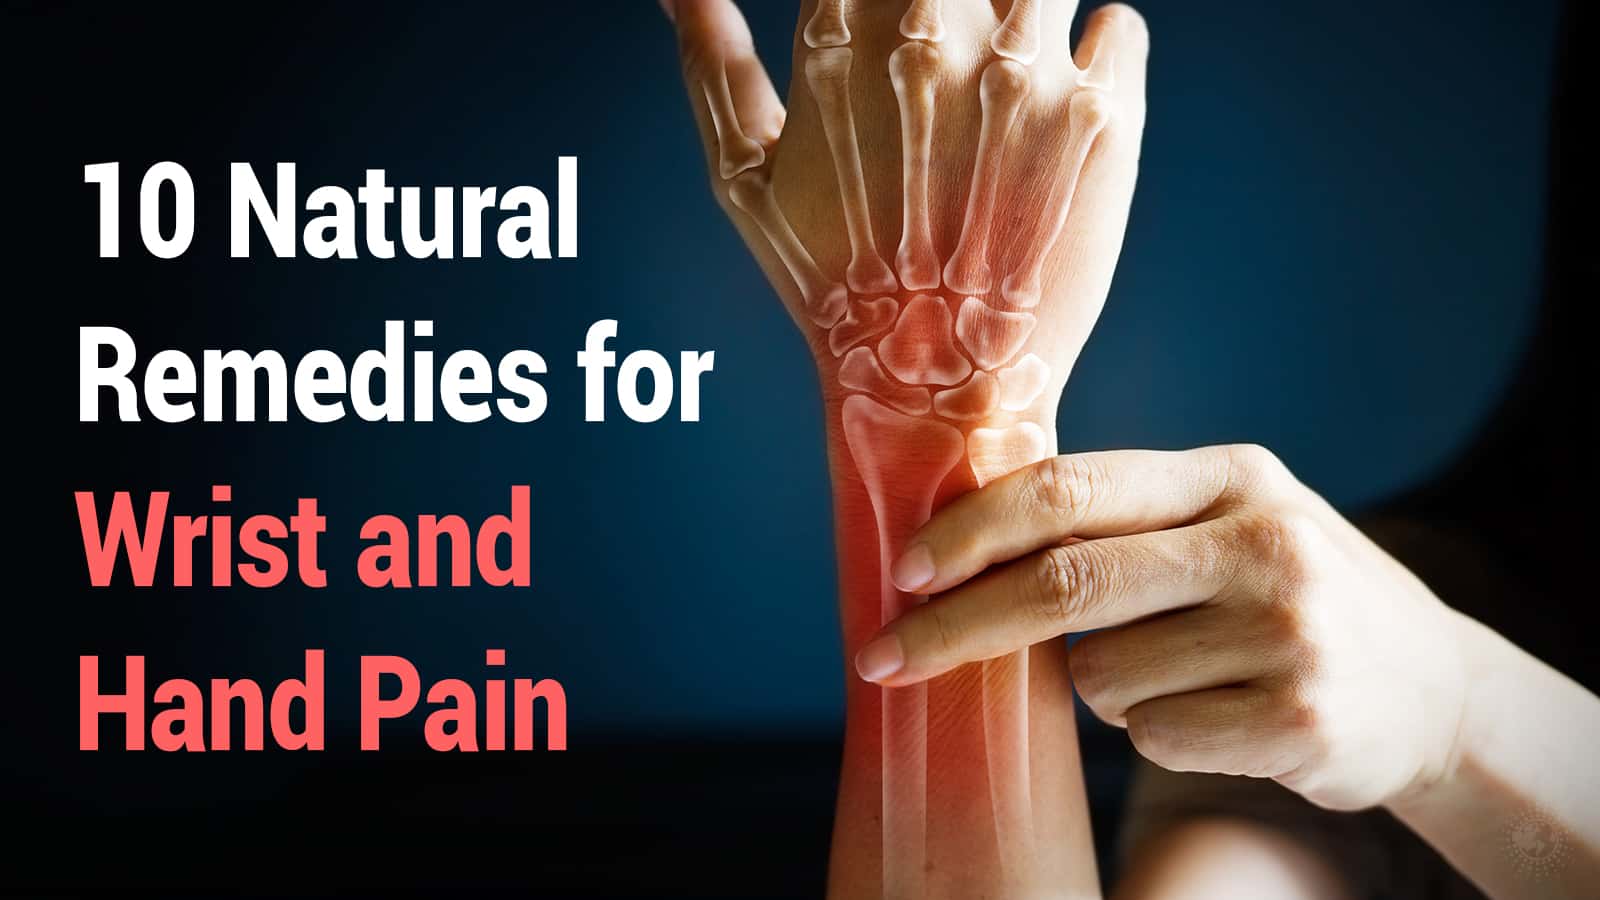 10 Natural Remedies for Wrist and Hand Pain | 5 Minute Read